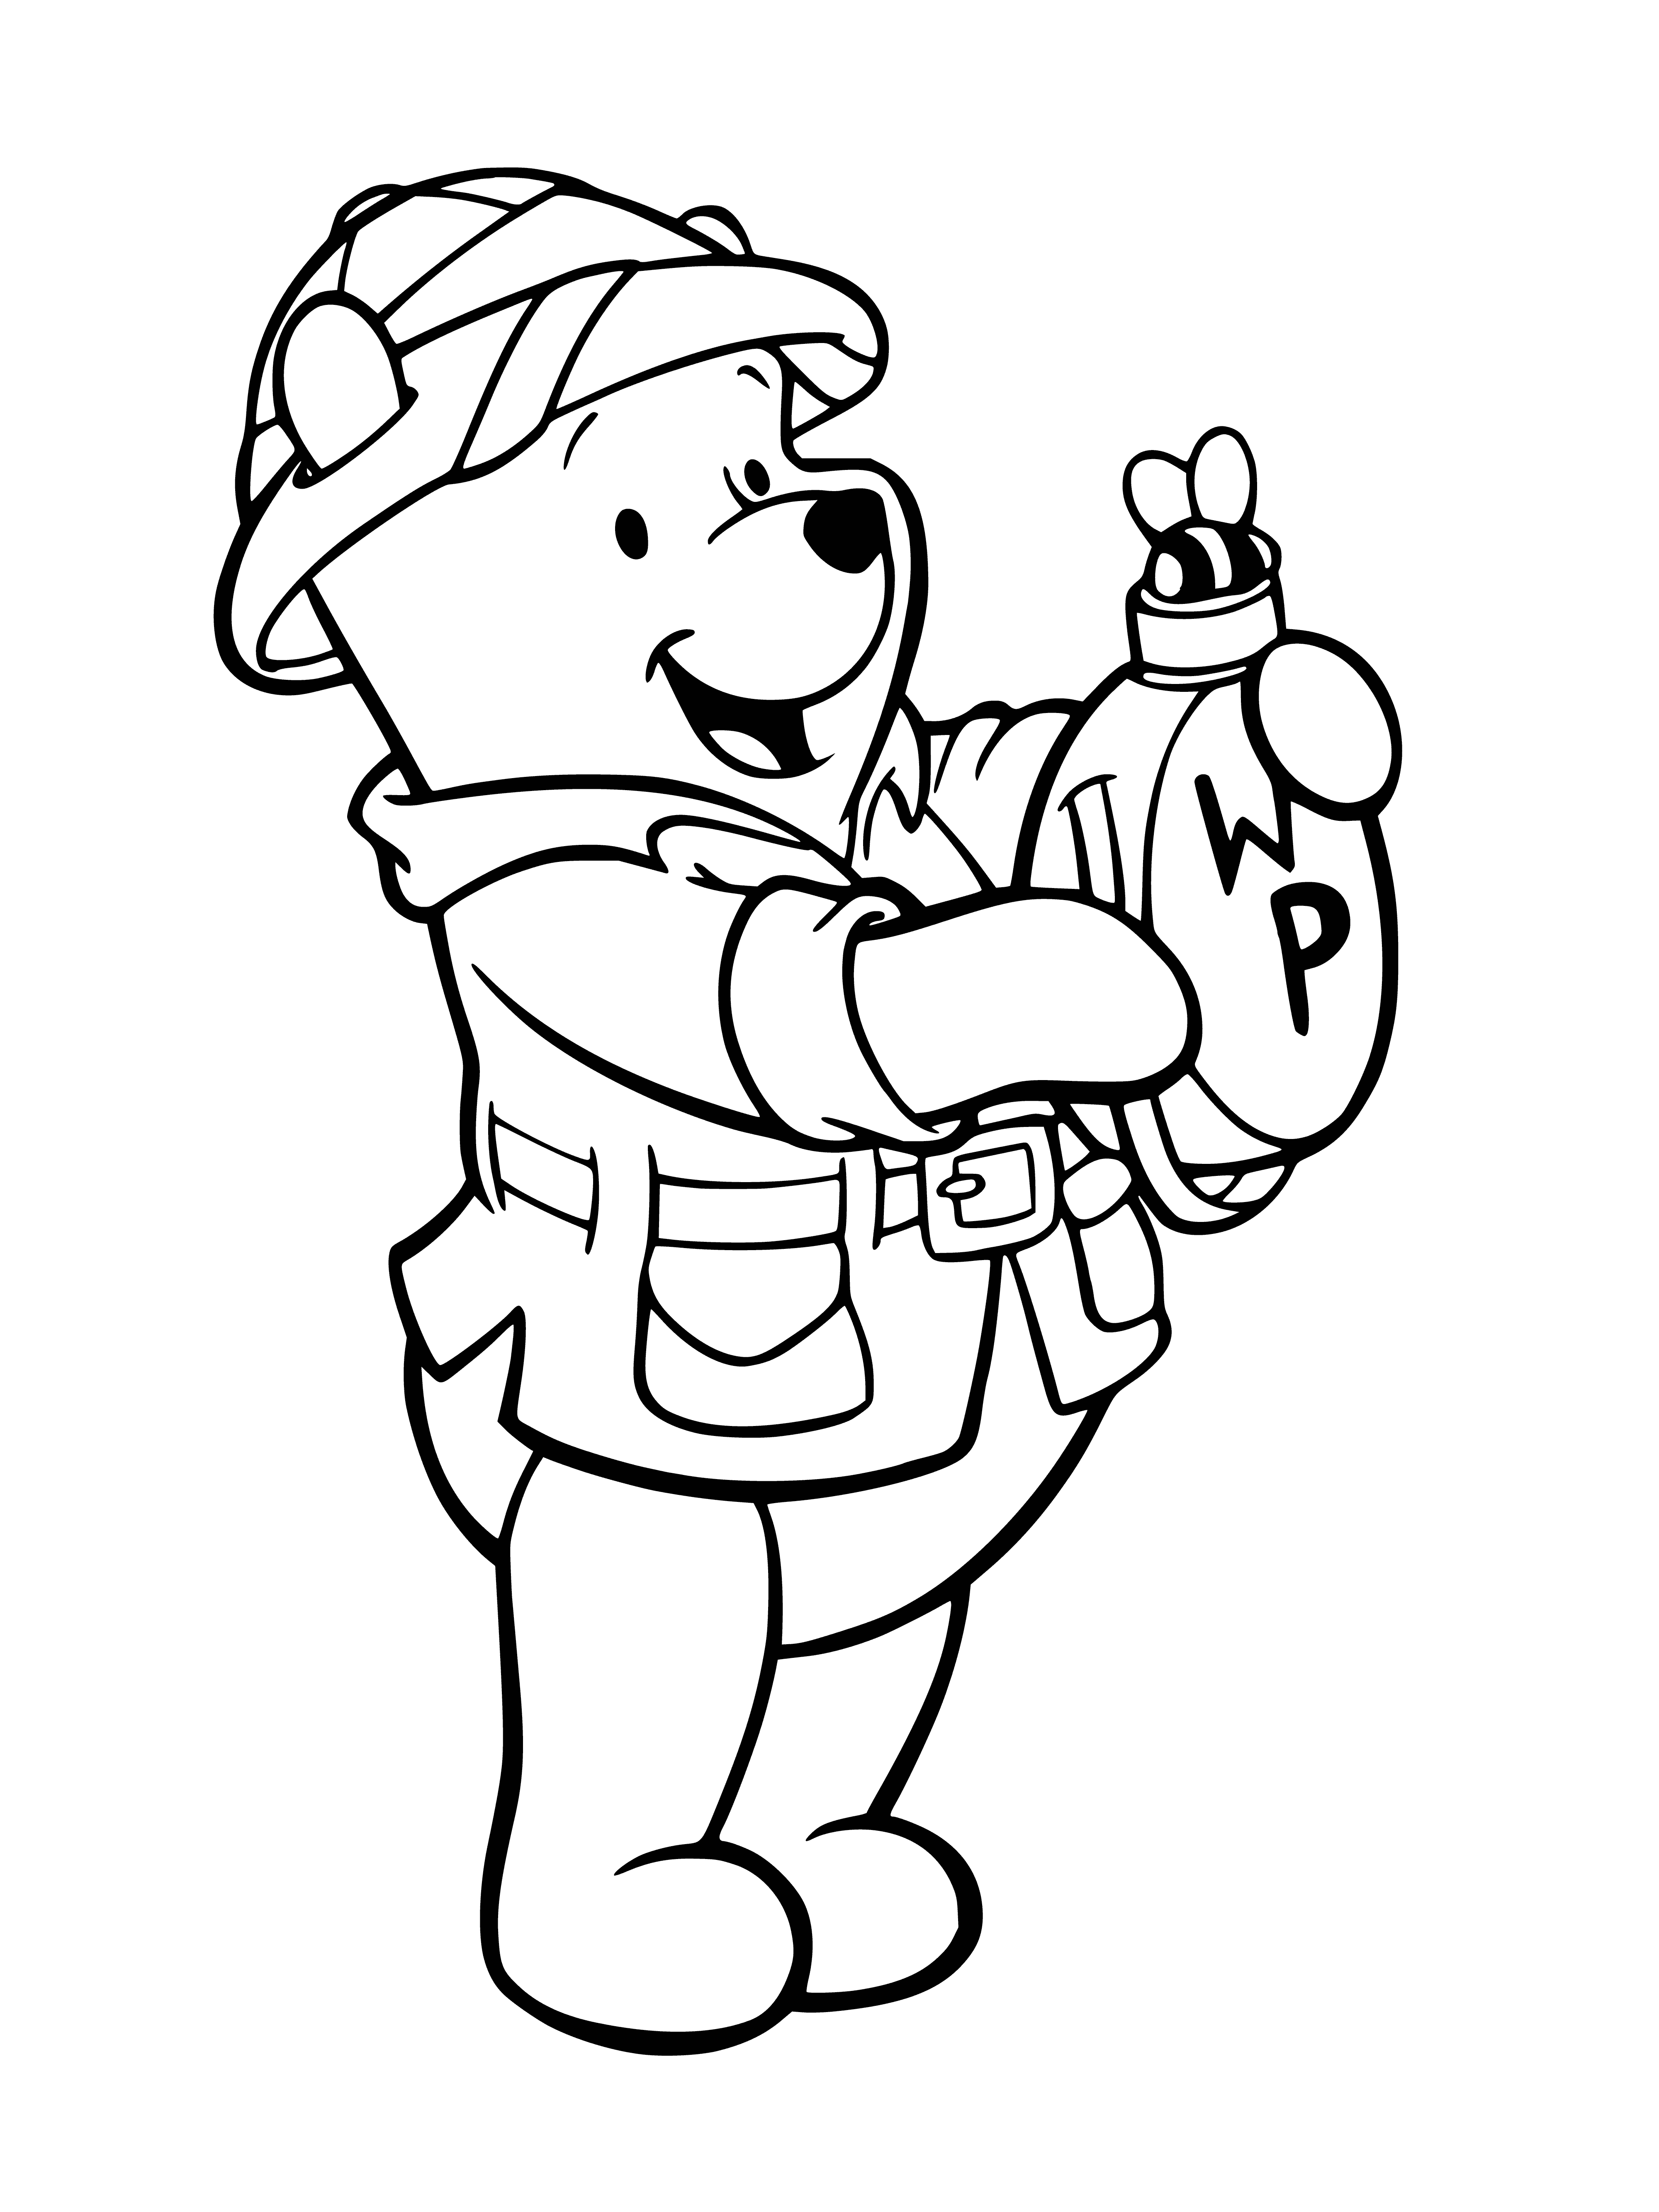 Winnie on an expedition coloring page